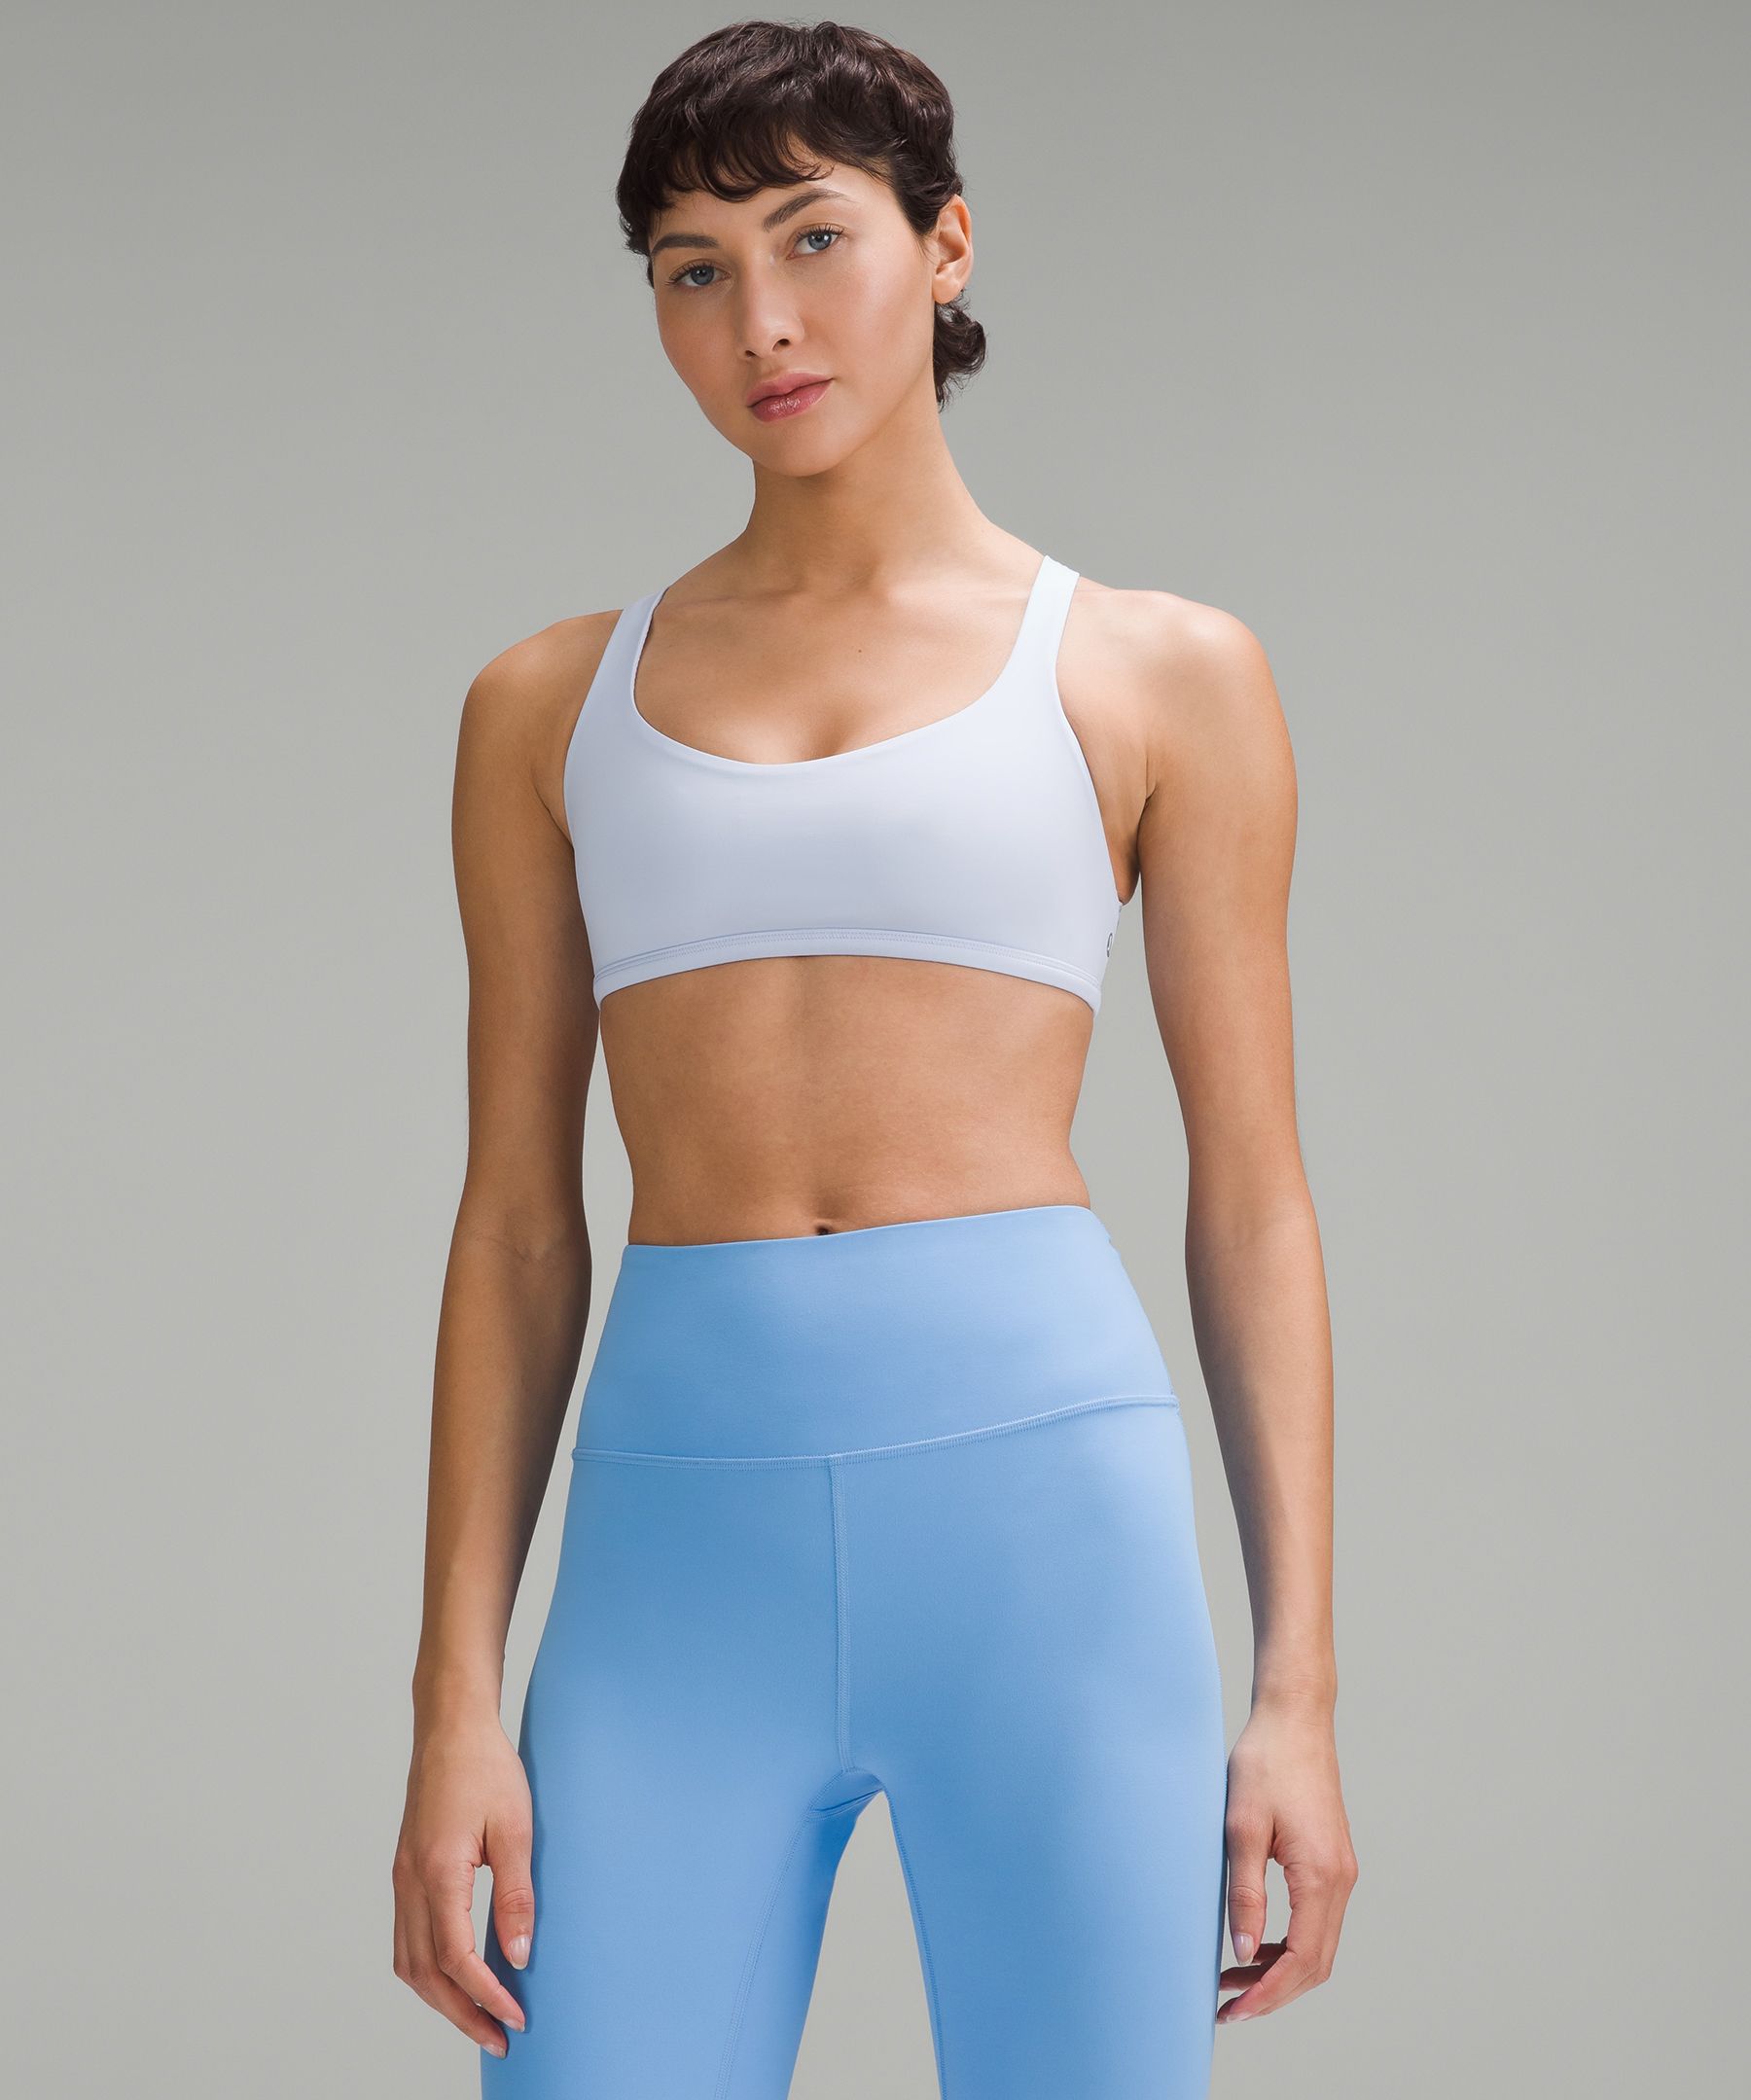 Are you ready for the ultimate comfort of Softstreme Shorts and Sports Bra?  – @lululemon Softstreme material provides a peach-fuzz touch…